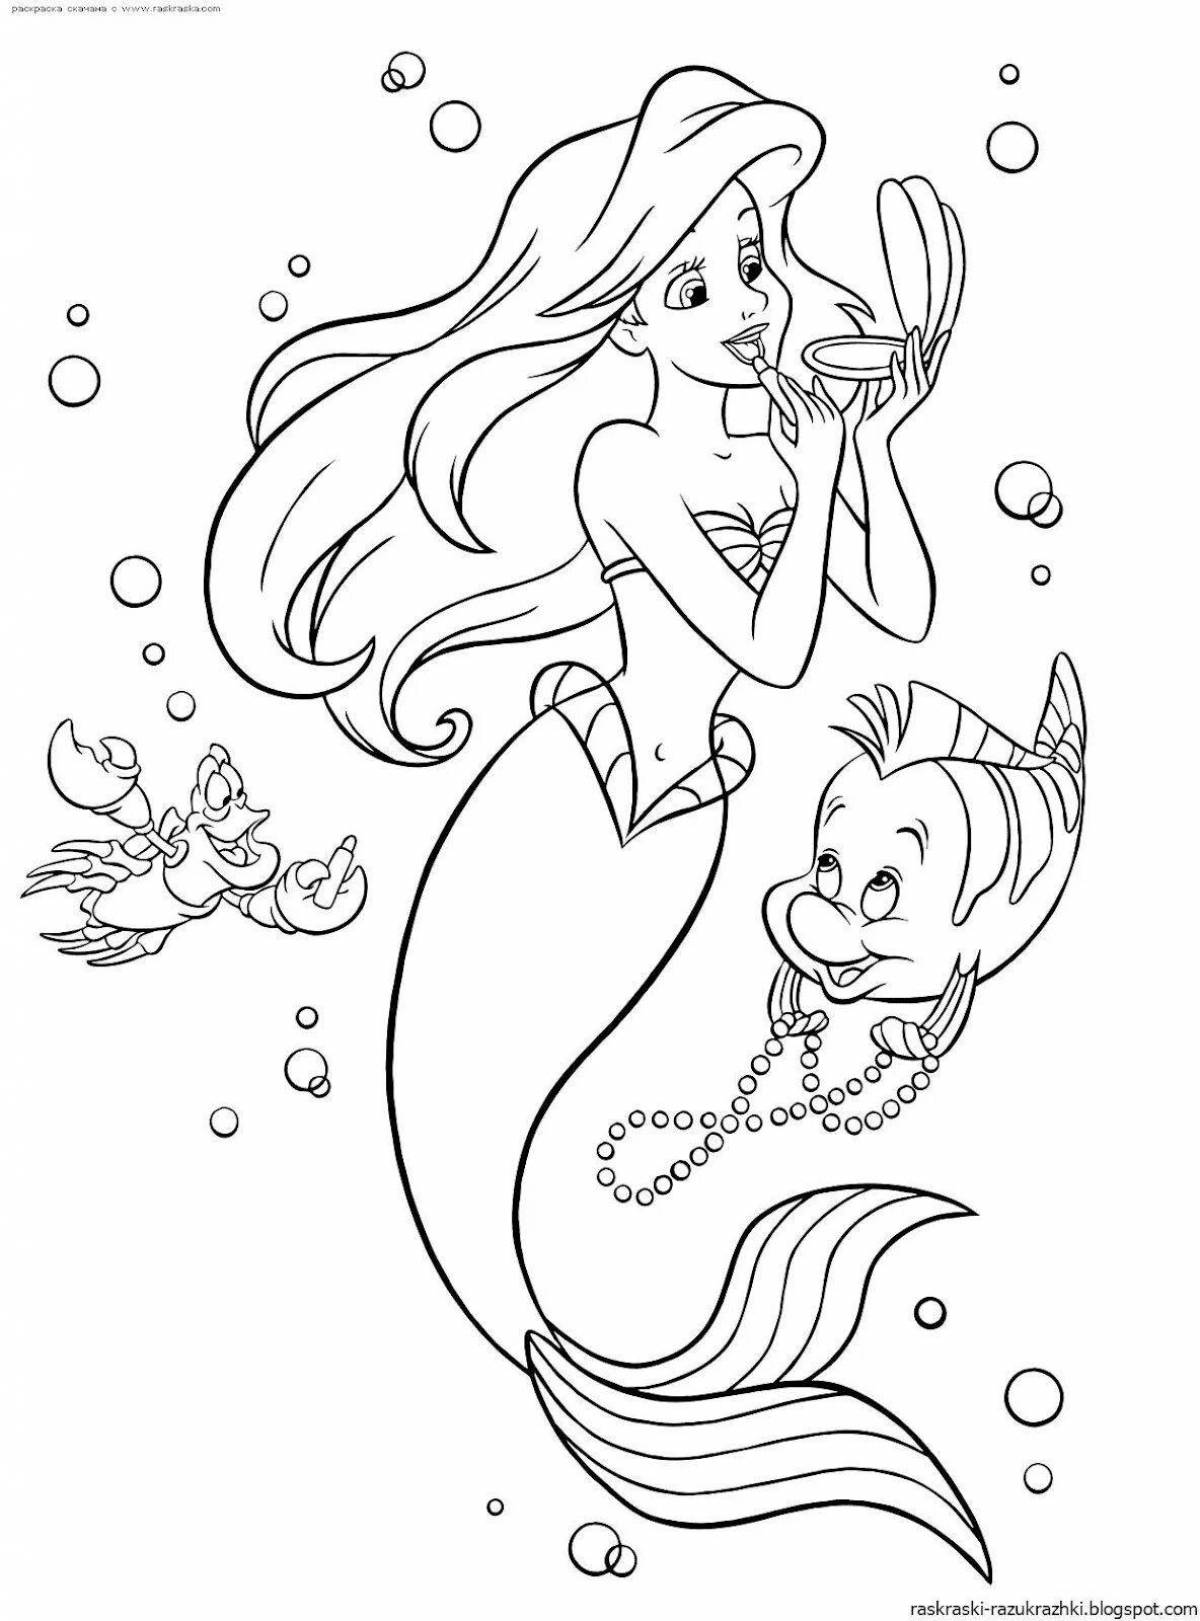 A fascinating little mermaid coloring book for children 4-5 years old